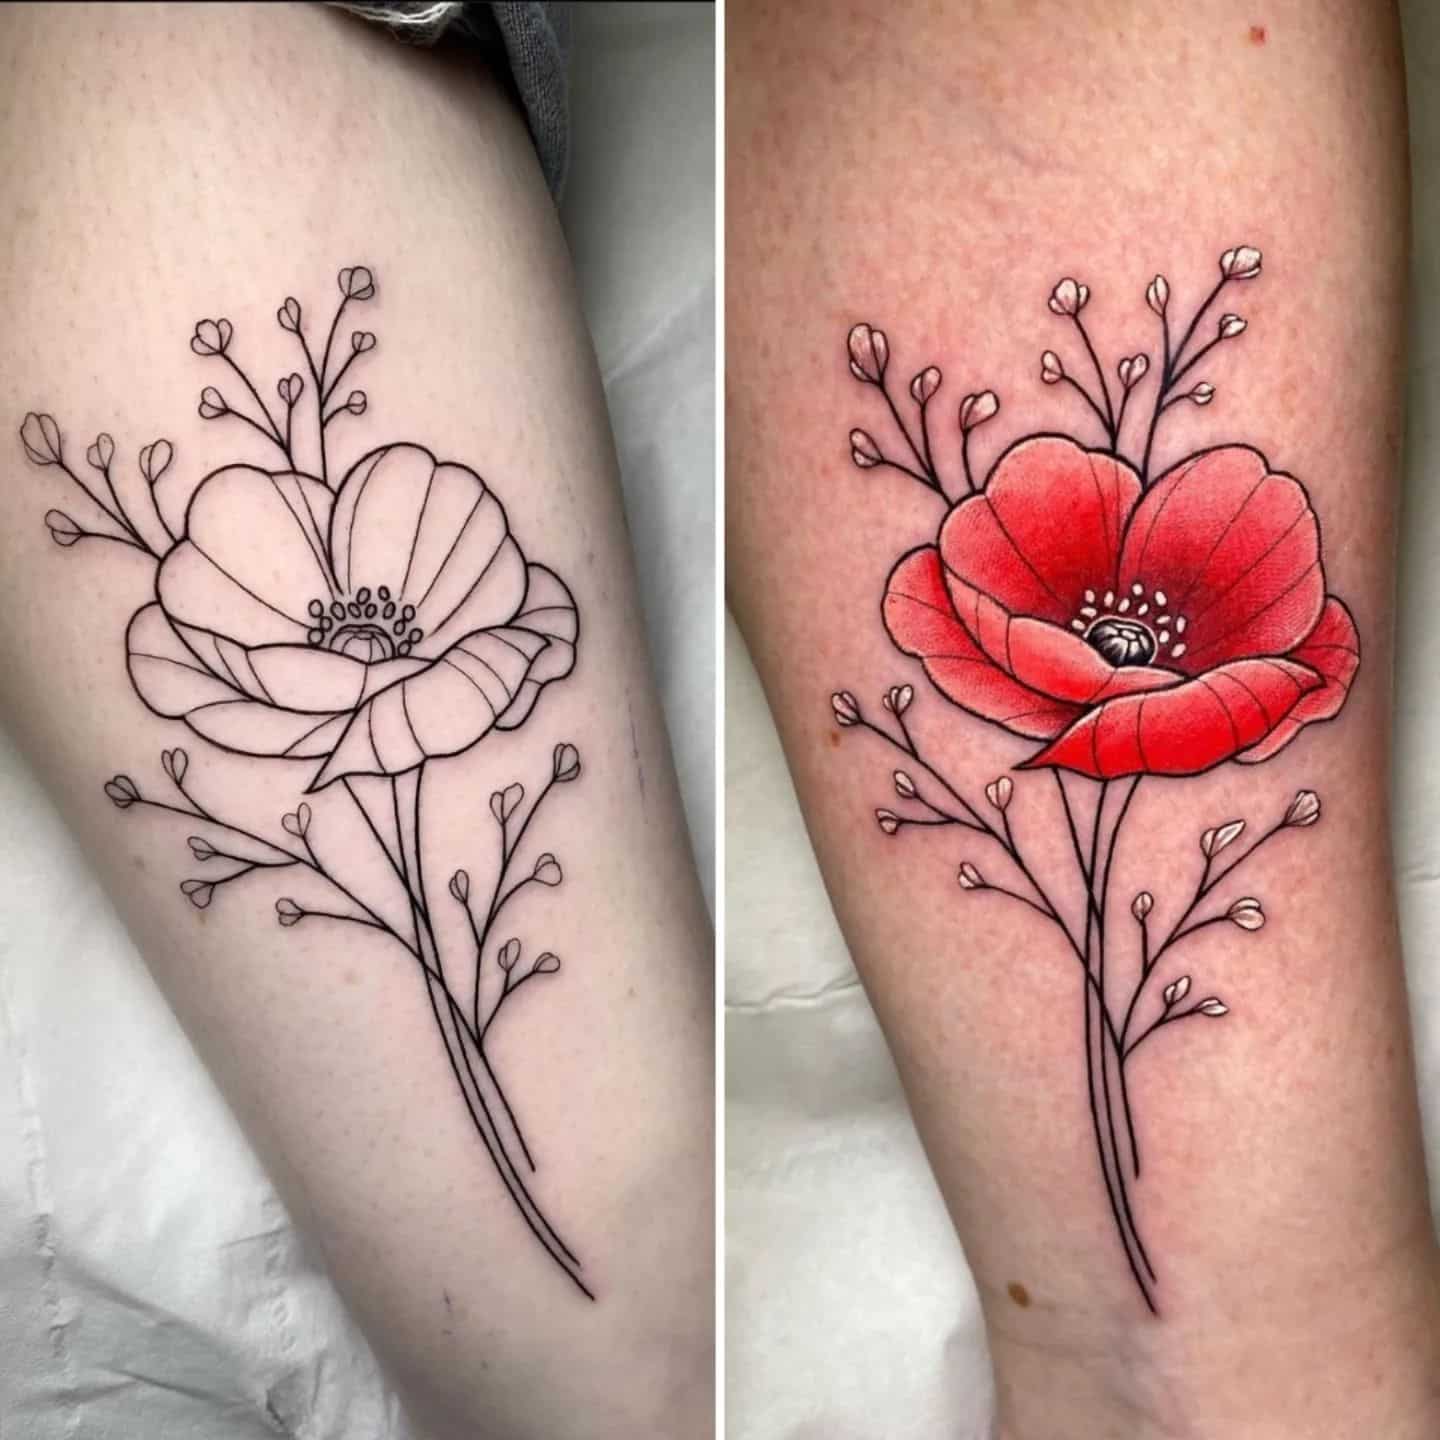 Daughter/ Mother tattoos. Linework for Claire and colour for Corrie, thanks so much for coming guys!
Tattoos by Noemi 

noemi_tattoo 

                      